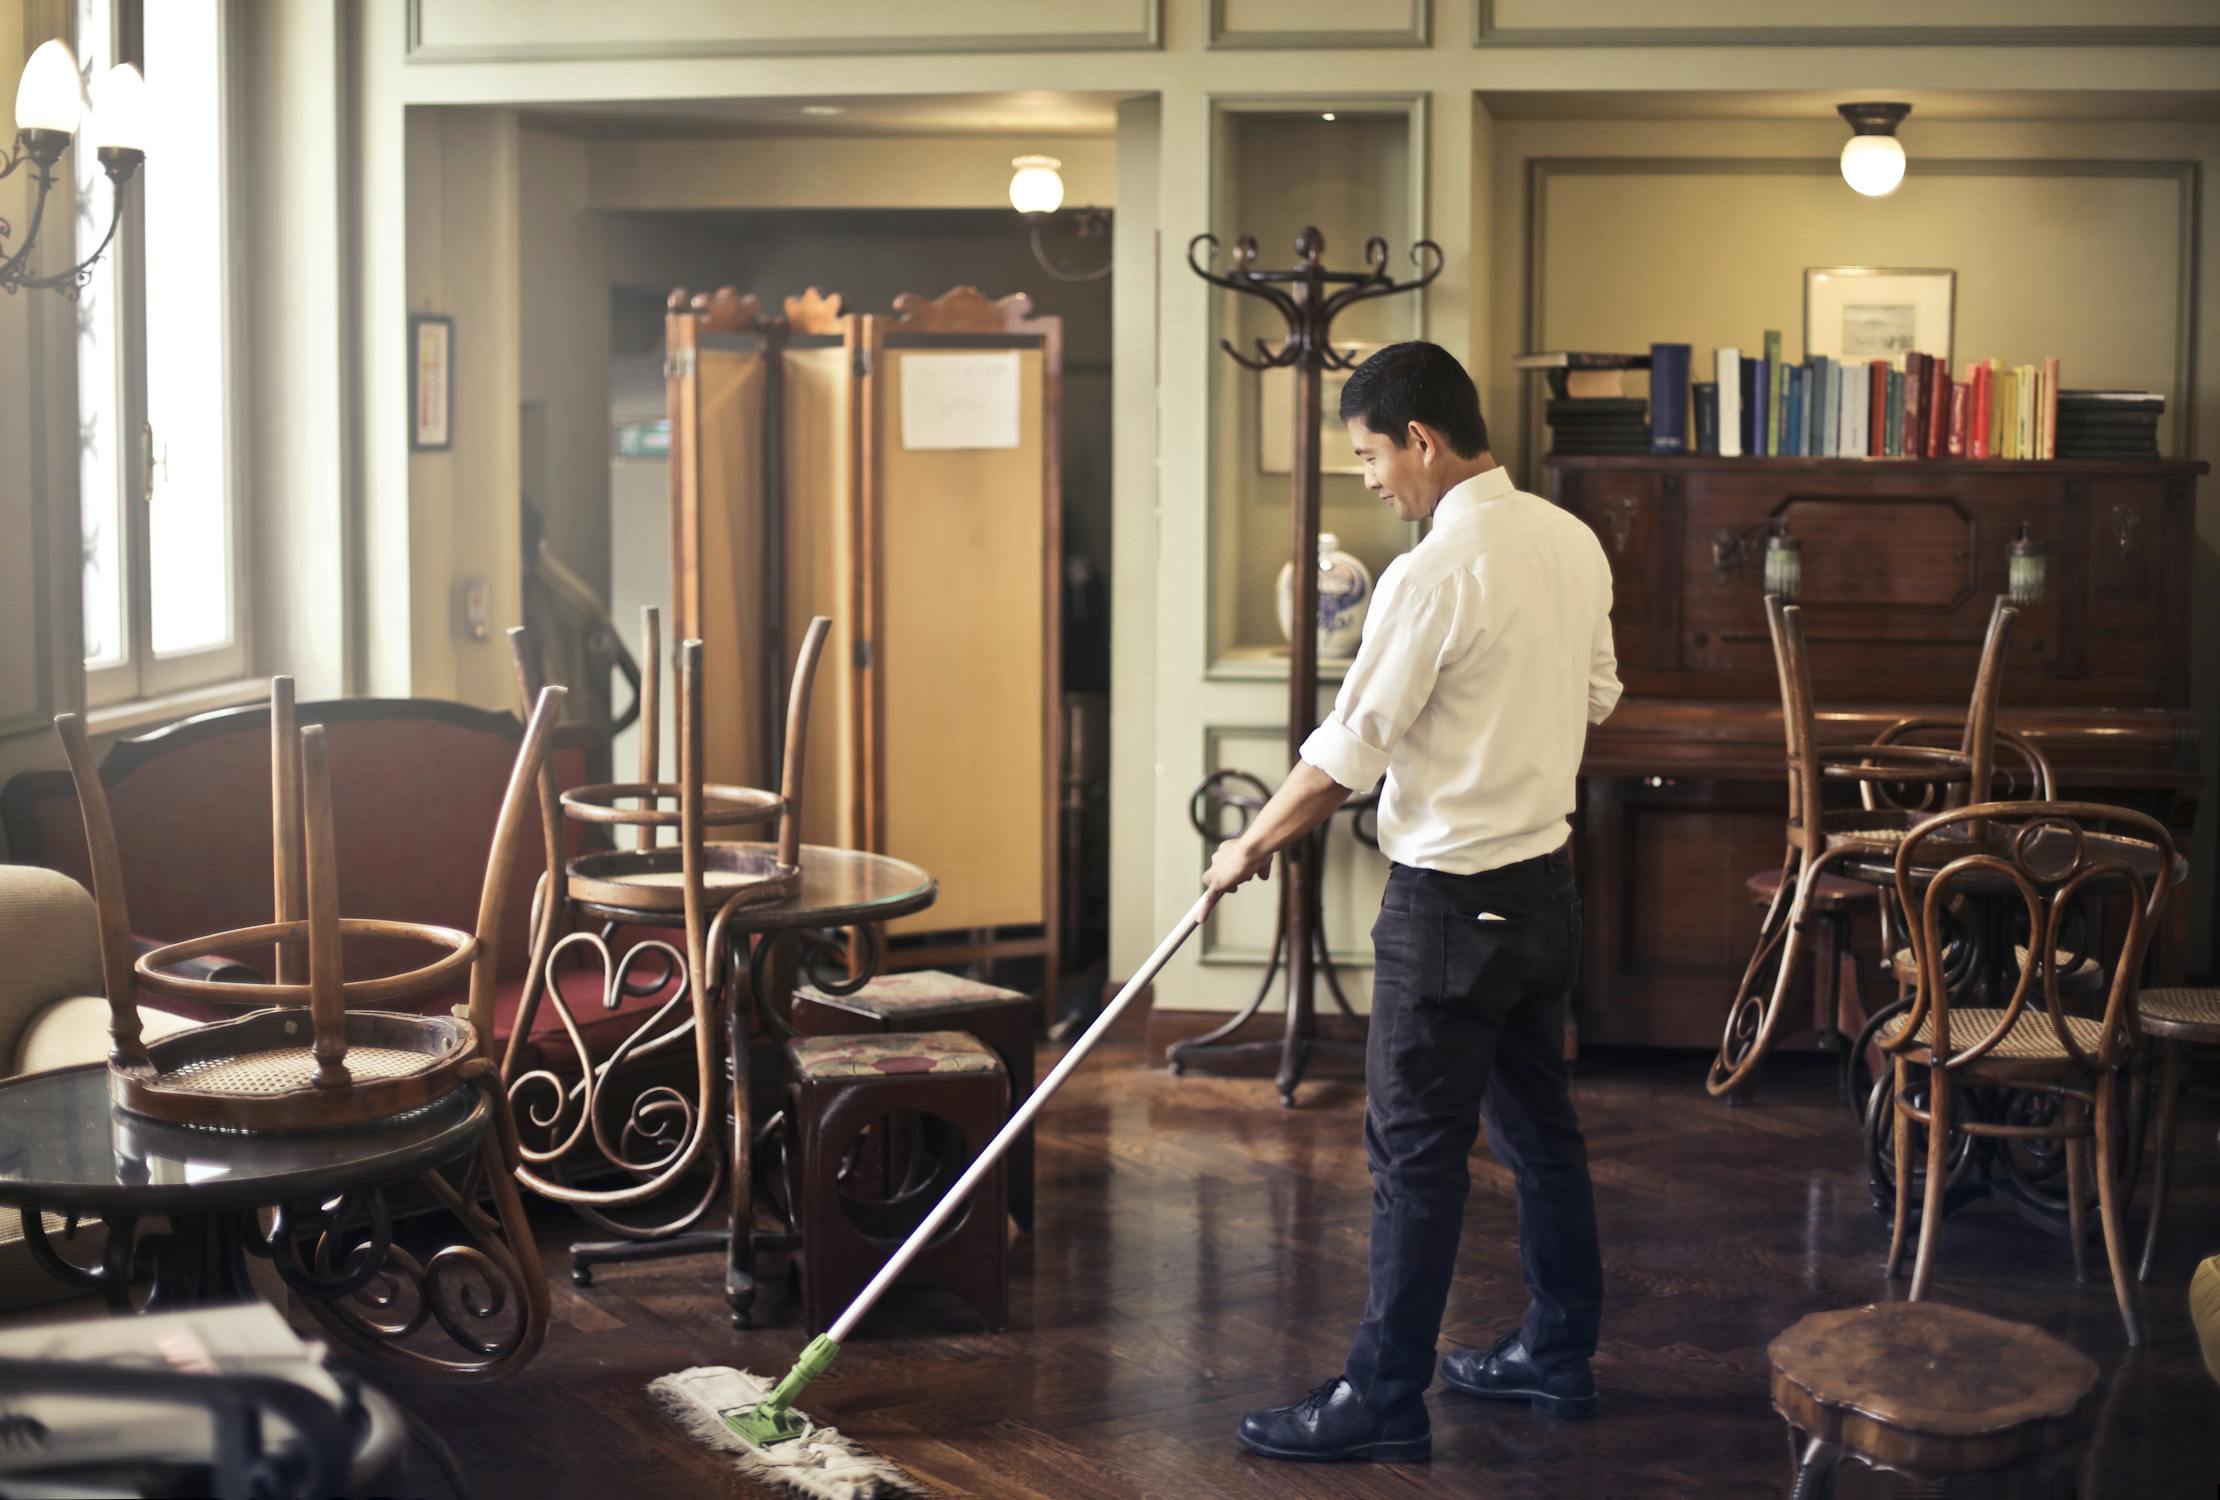 Professional Cleaning and Hospitality Services